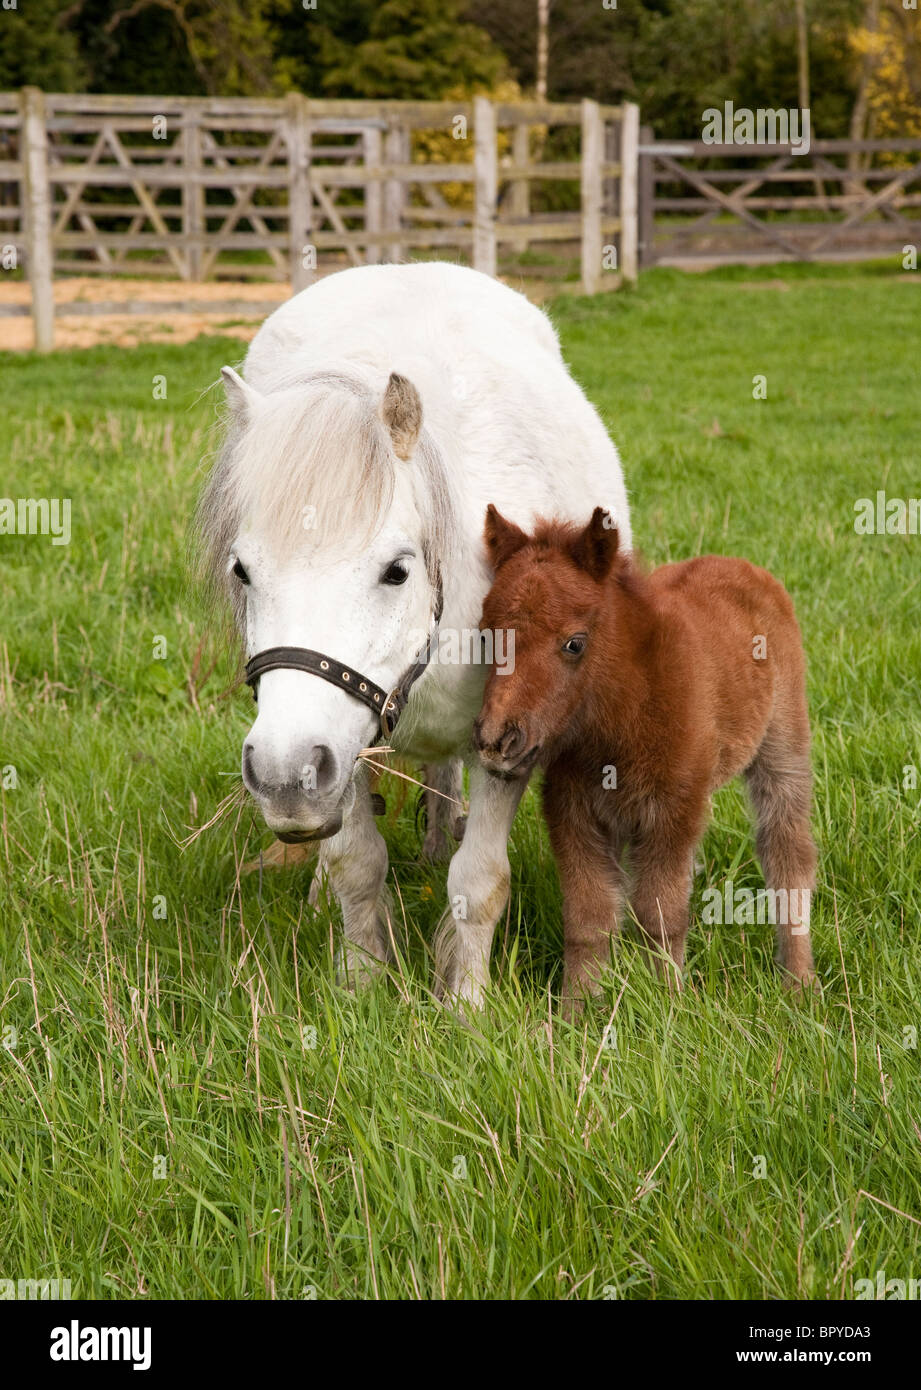 A grey Shetland pony mare and her young foal in a grass field Stock Photo